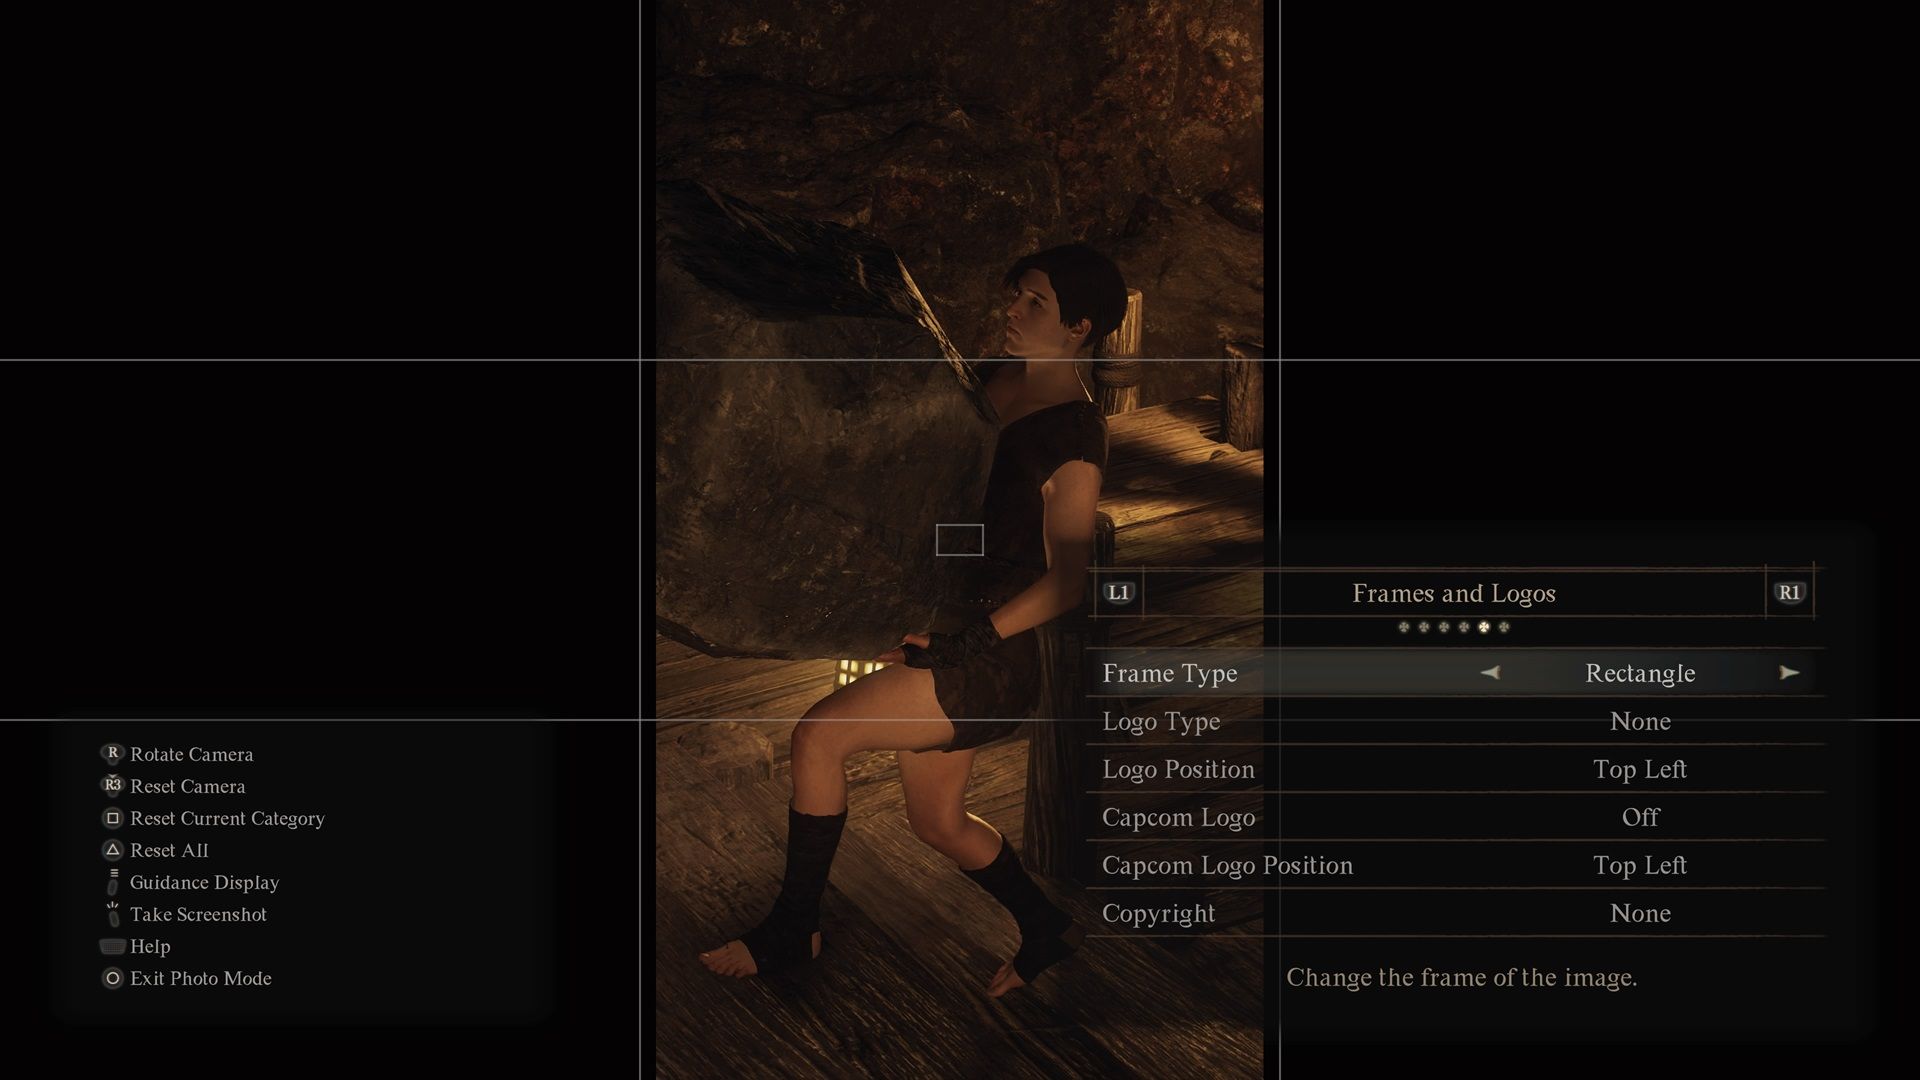 You can even change the aspect ratio in the Dragon's Dogma 2 photo mode